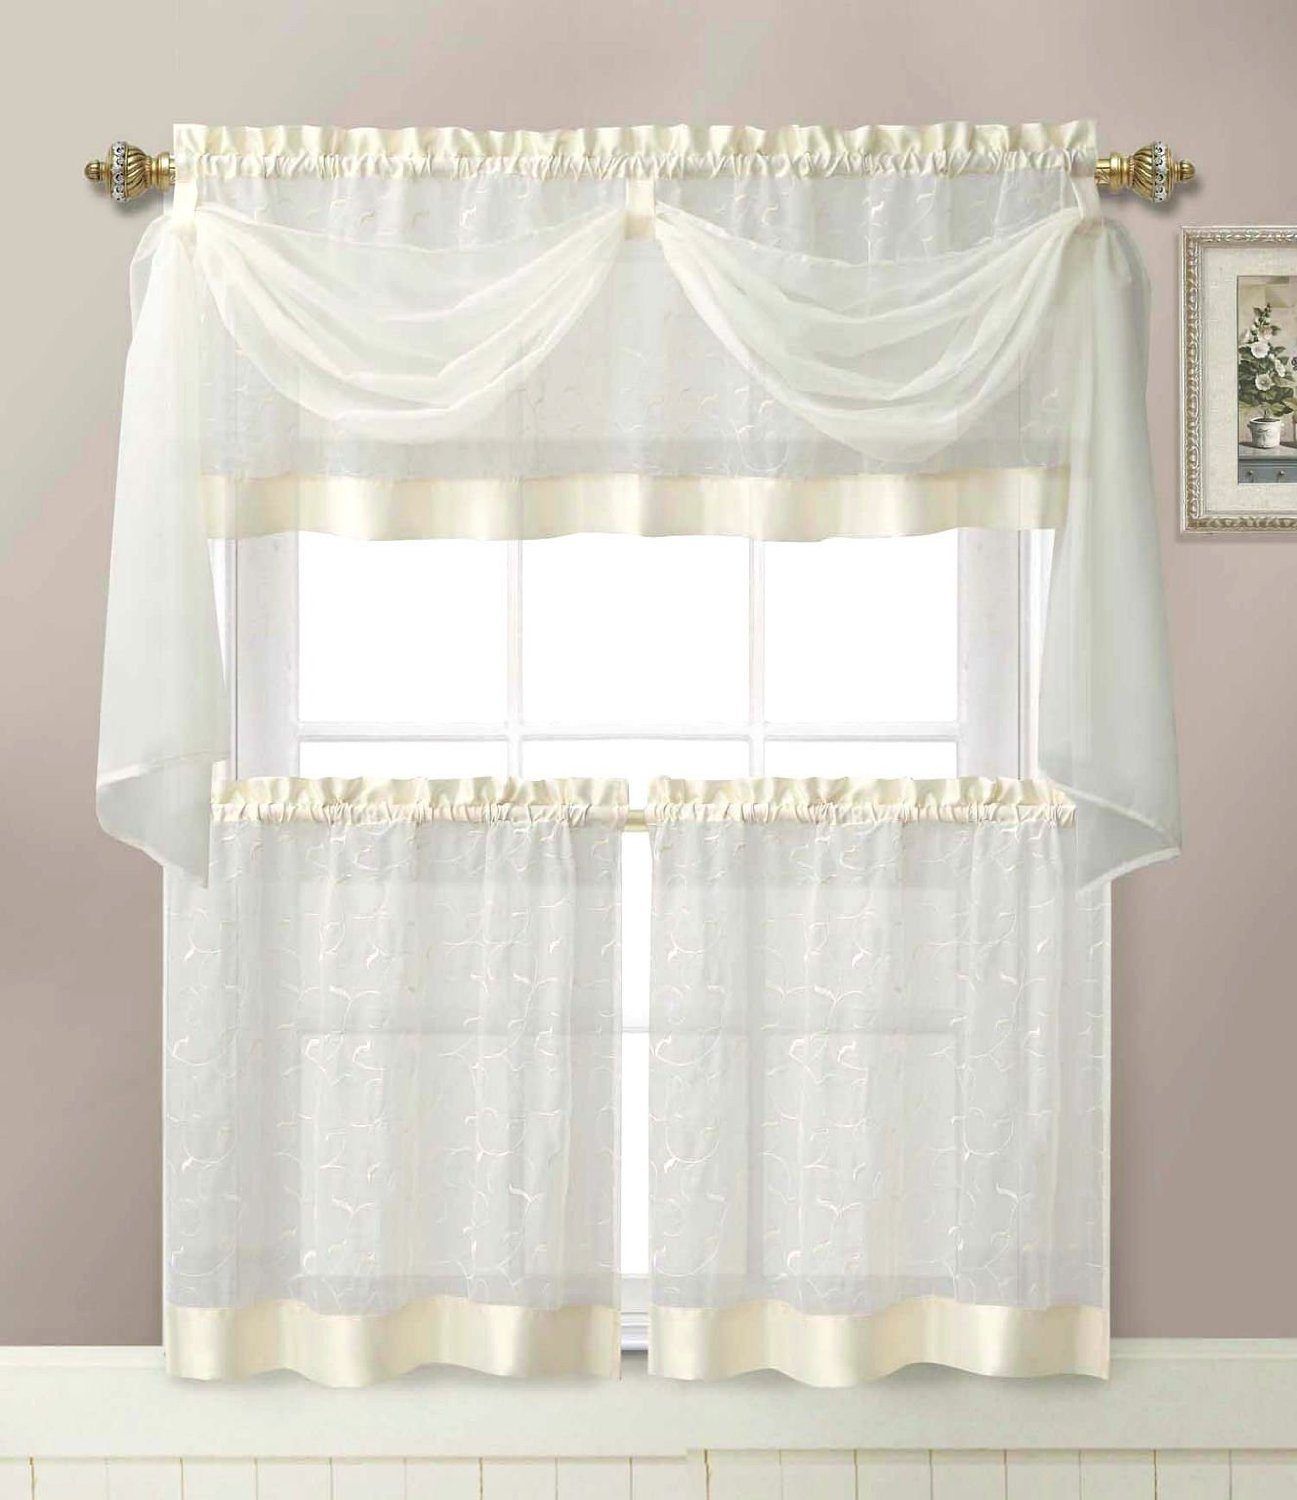 Linen Leaf Embroidered Sheer Kitchen Curtain Tall Kitchen Within Floral Embroidered Sheer Kitchen Curtain Tiers, Swags And Valances (View 15 of 20)